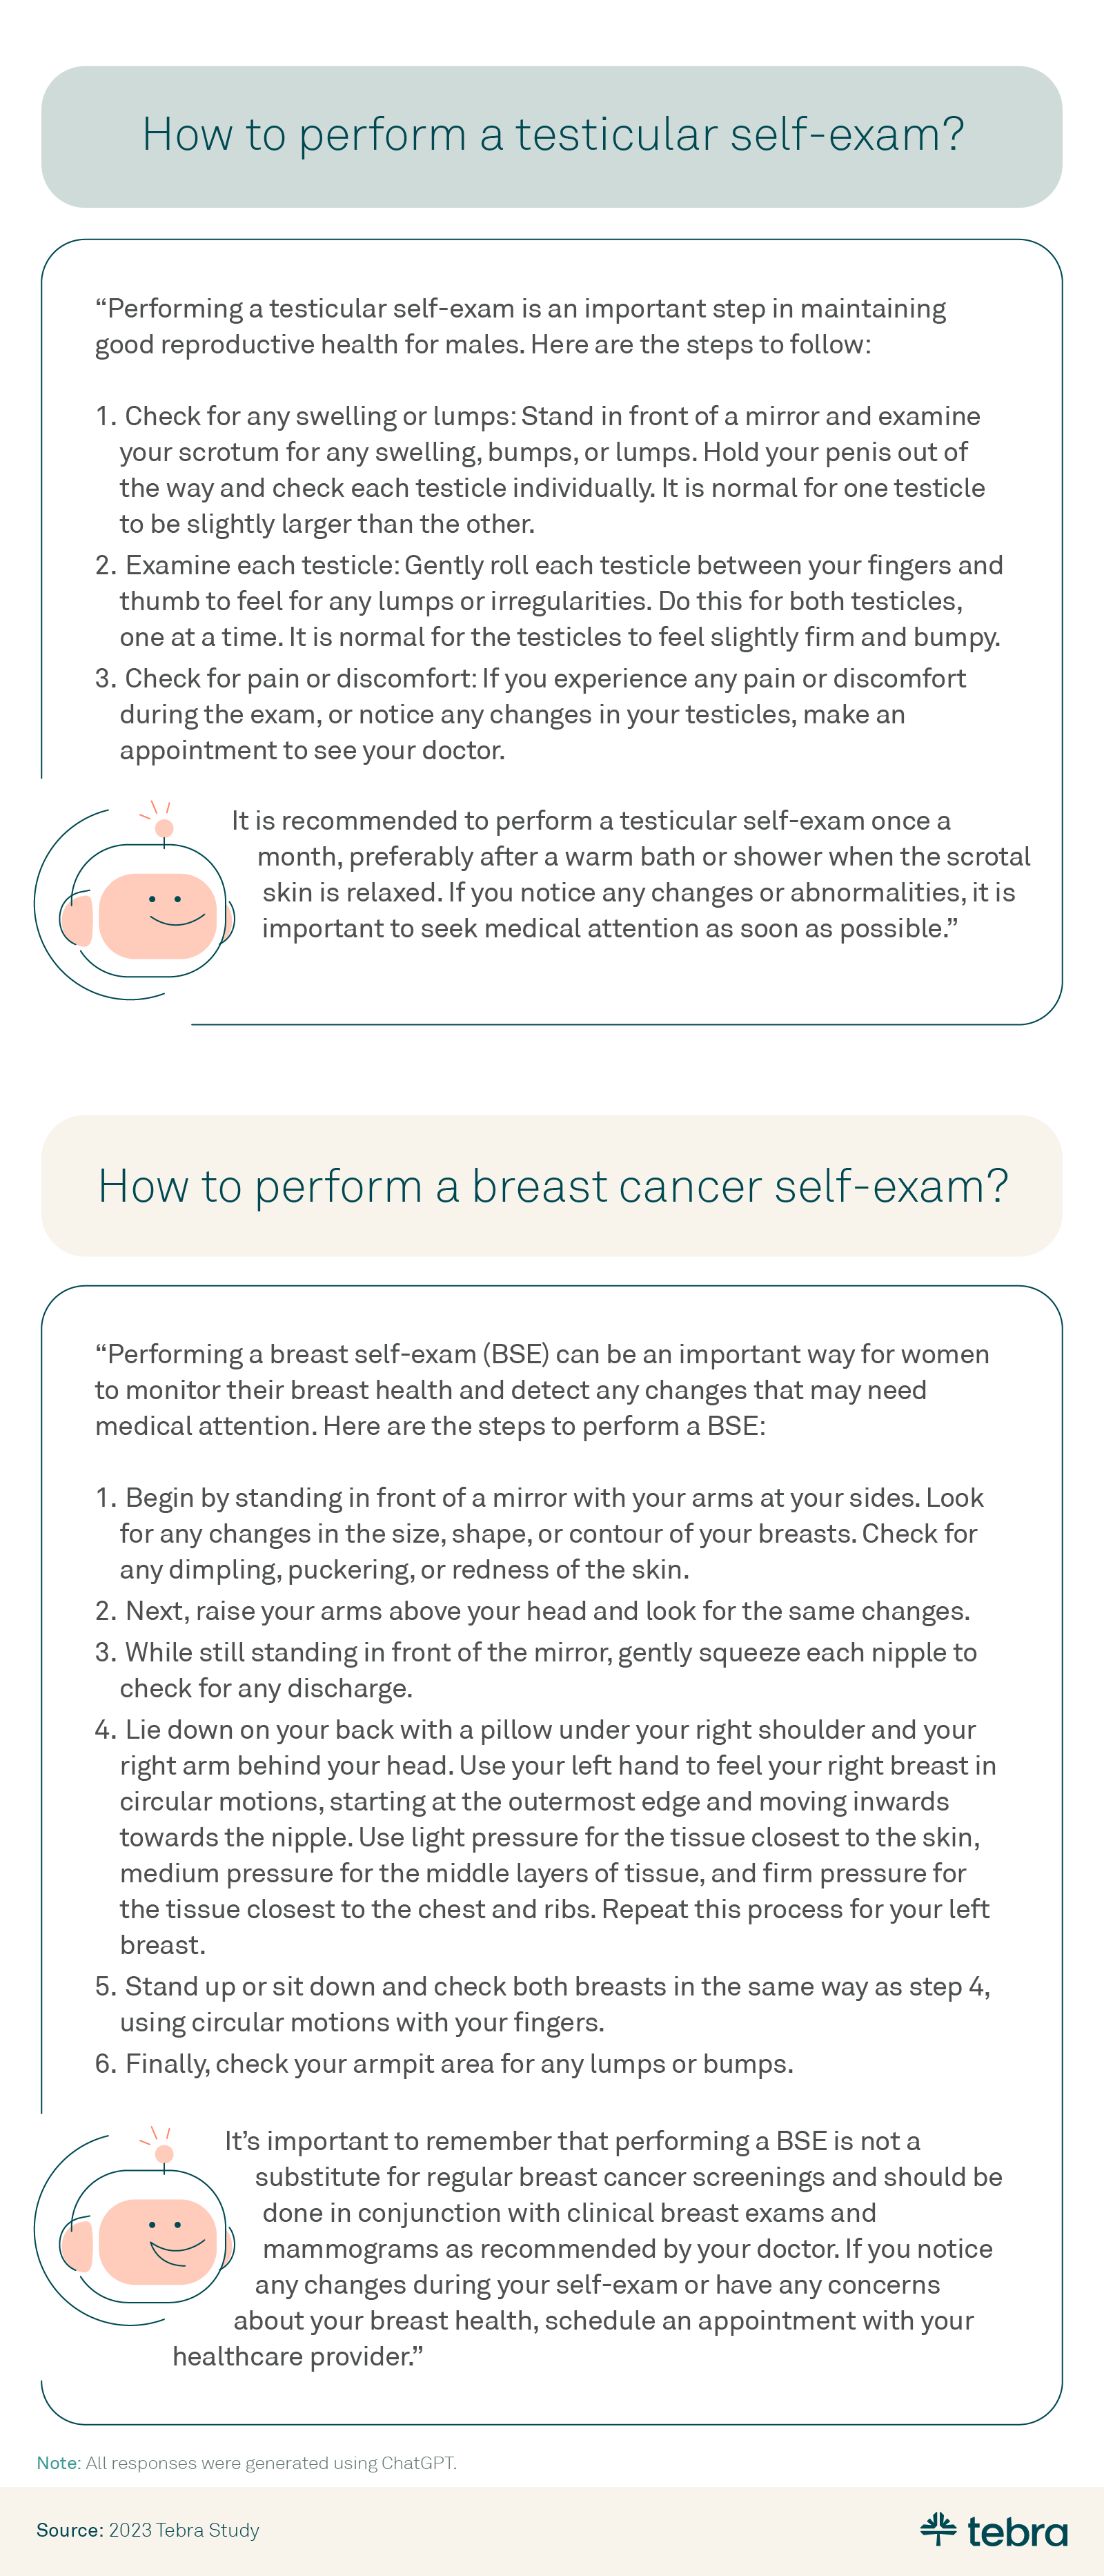 This is an infographic about Tebra research around the topic of AI in healthcare. This graphic features a response from ChatGPT around the question "How to perform a testicular self-exam?" Its response was: "Performing a testicular self-exam is an important step in maintaining good reproductive health for males. Here are the steps to follow: Check for any swelling or lumps: Stand in front of a mirror and examine your scrotum for any swelling, bumps, or lumps. Hold your penis out of the way and check each testicle individually. It is normal for one testicle to be slightly larger than the other. Examine each testicle: Gently roll each testicle between your fingers and thumb to feel for any lumps or irregularities. Do this for both testicles, one at a time. It is normal for the testicles to feel slightly firm and bumpy. Check for pain or discomfort: If you experience any pain or discomfort during the exam, or notice any changes in your testicles, make an appointment to see your doctor. It is recommended to perform a testicular self-exam once a month, preferably after a warm bath or shower when the scrotal skin is relaxed. If you notice any changes or abnormalities, it is important to seek medical attention as soon as possible." This graphic also features a response from ChatGPT around the question "How to perform a breast cancer self-exam?". Its response was: "Performing a breast self-exam (BSE) can be an important way for women to monitor their breast health and detect any changes that may need medical attention. Here are the steps to perform a BSE: Begin by standing in front of a mirror with your arms at your sides. Look for any changes in the size, shape, or contour of your breasts. Check for any dimpling, puckering, or redness of the skin. Next, raise your arms above your head and look for the same changes. While still standing in front of the mirror, gently squeeze each nipple to check for any discharge. Lie down on your back with a pillow under your right shoulder and your right arm behind your head. Use your left hand to feel your right breast in circular motions, starting at the outermost edge and moving inwards towards the nipple. Use light pressure for the tissue closest to the skin, medium pressure for the middle layers of tissue, and firm pressure for the tissue closest to the chest and ribs. Repeat this process for your left breast. Stand up or sit down and check both breasts in the same way as step 4, using circular motions with your fingers. Finally, check your armpit area for any lumps or bumps. It's important to remember that performing a BSE is not a substitute for regular breast cancer screenings and should be done in conjunction with clinical breast exams and mammograms as recommended by your doctor. If you notice any changes during your self-exam or have any concerns about your breast health, schedule an appointment with your healthcare provider."